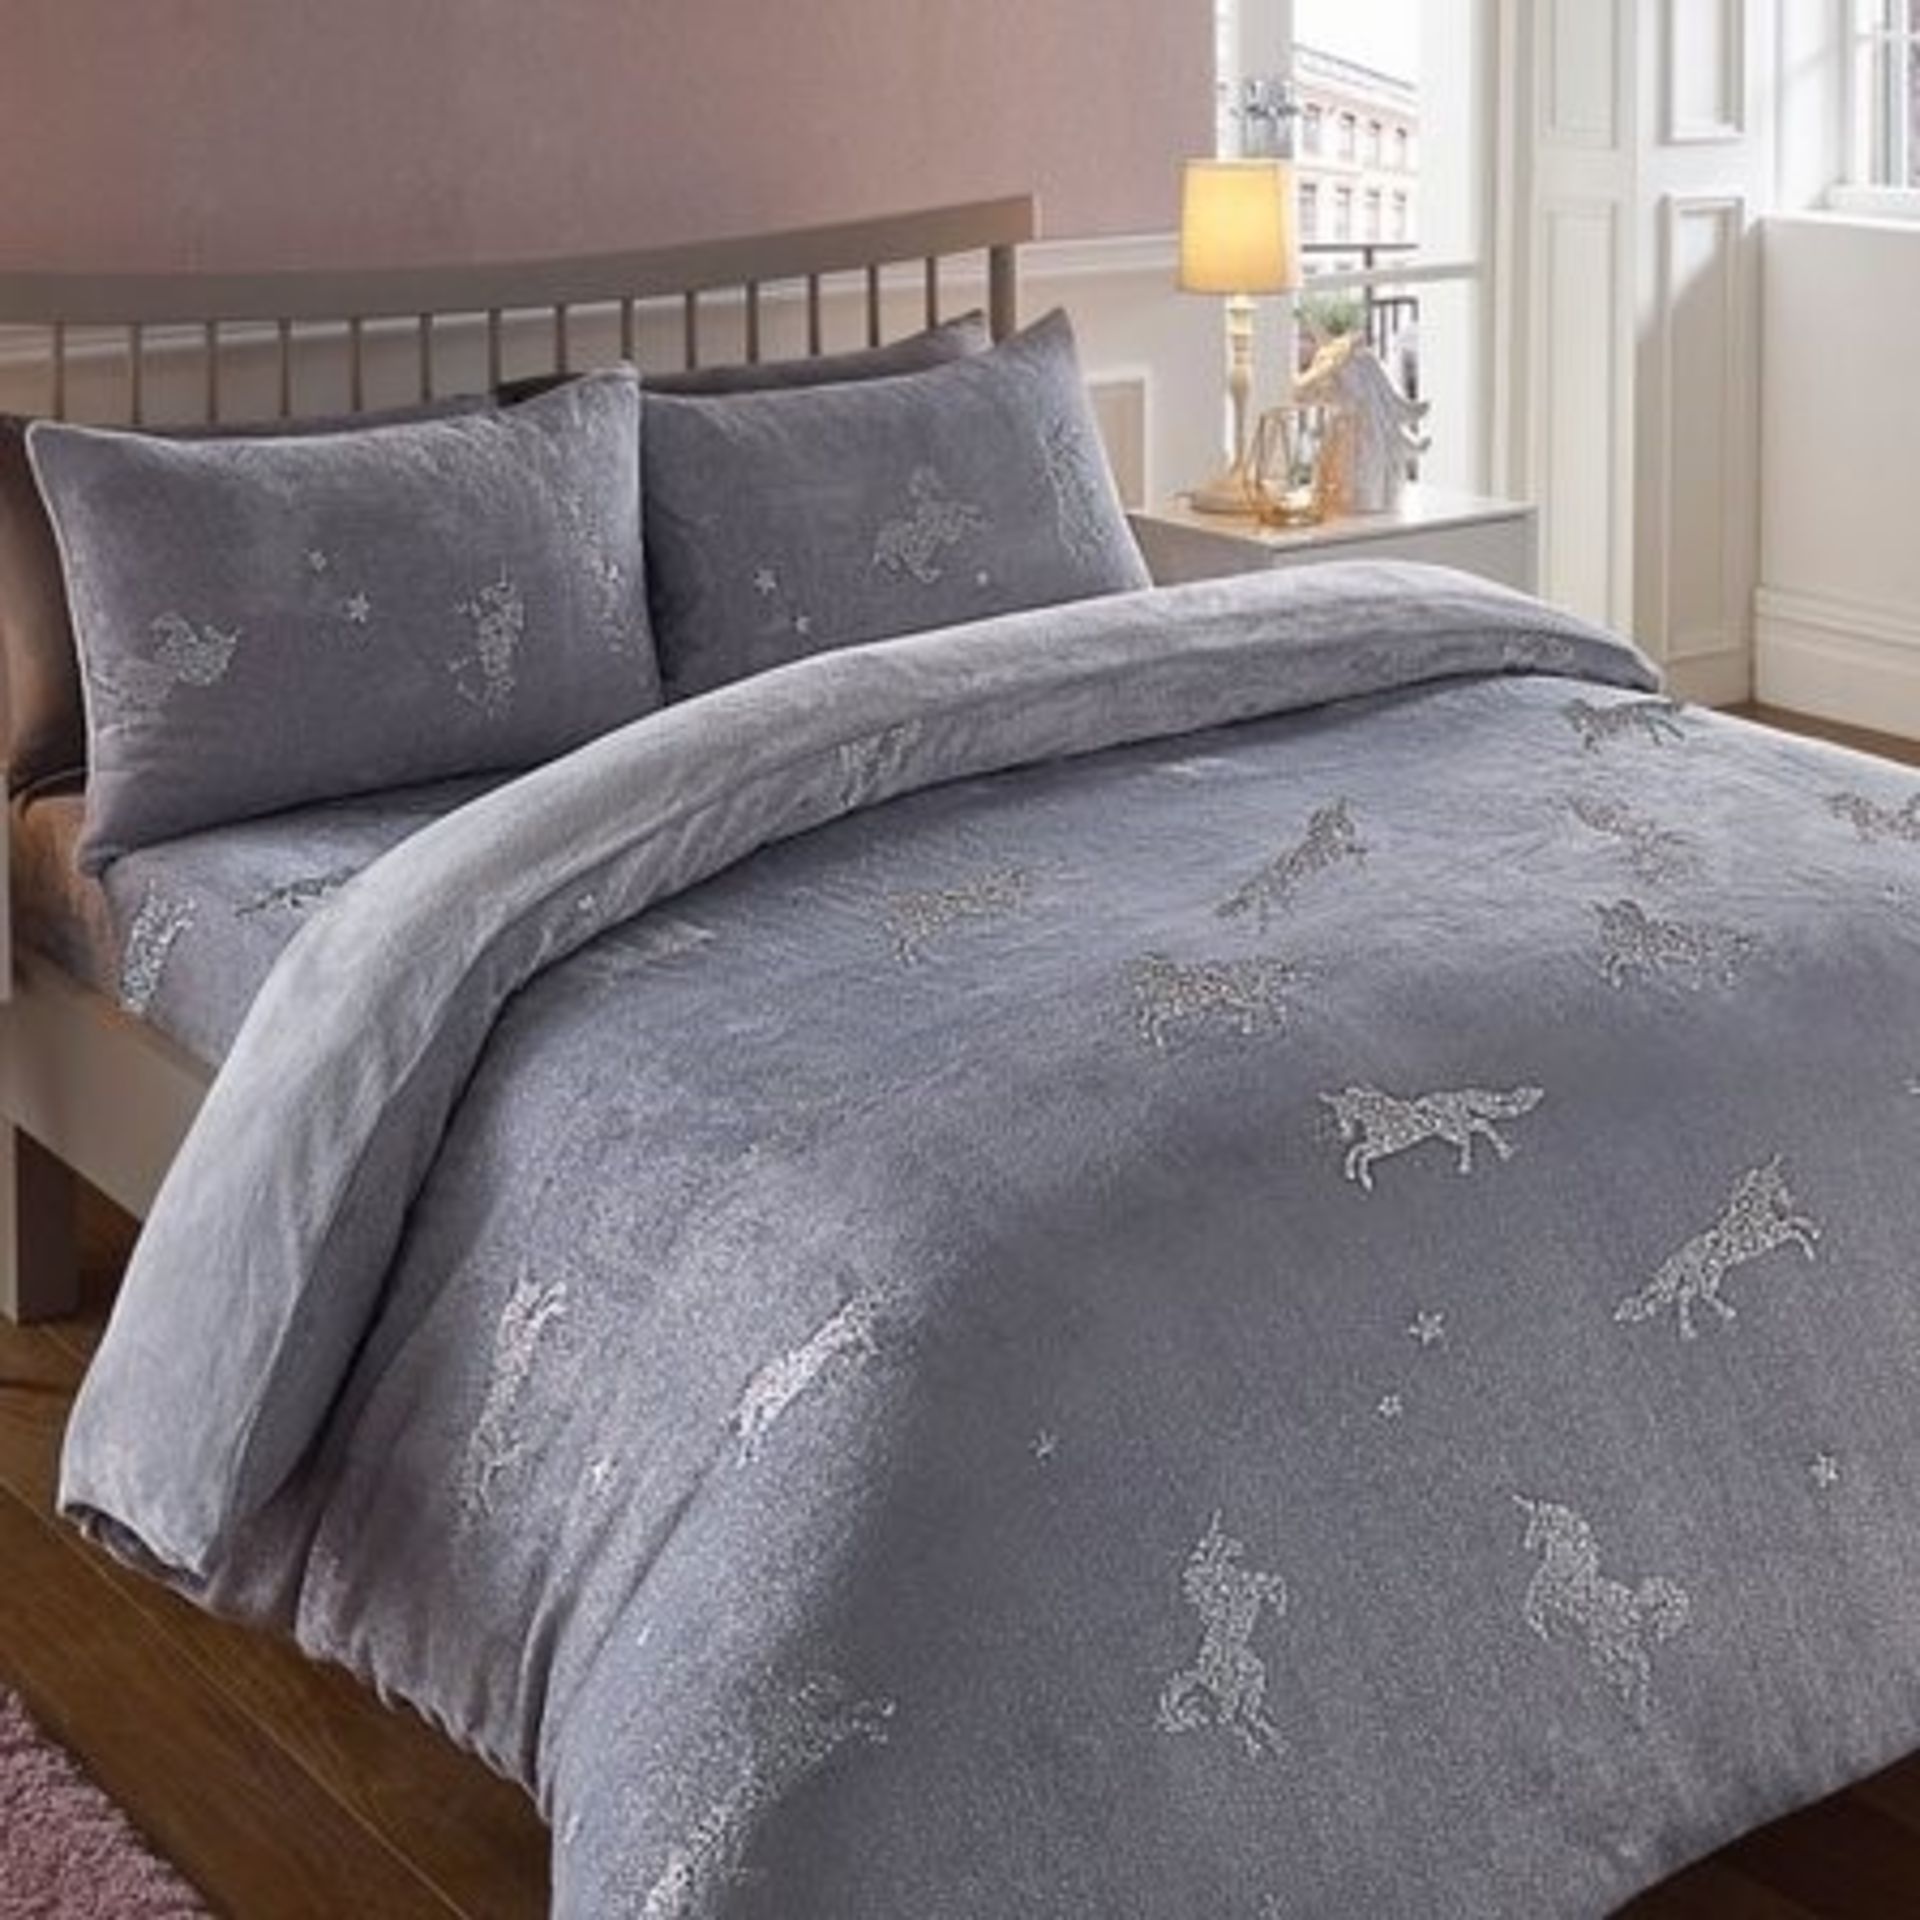 1 AS NEW BAGGED ULTRA COSY TEDDY UNICORN FLEECE DOUBLE DUVET SET IN GREY (VIEWING HIGHLY